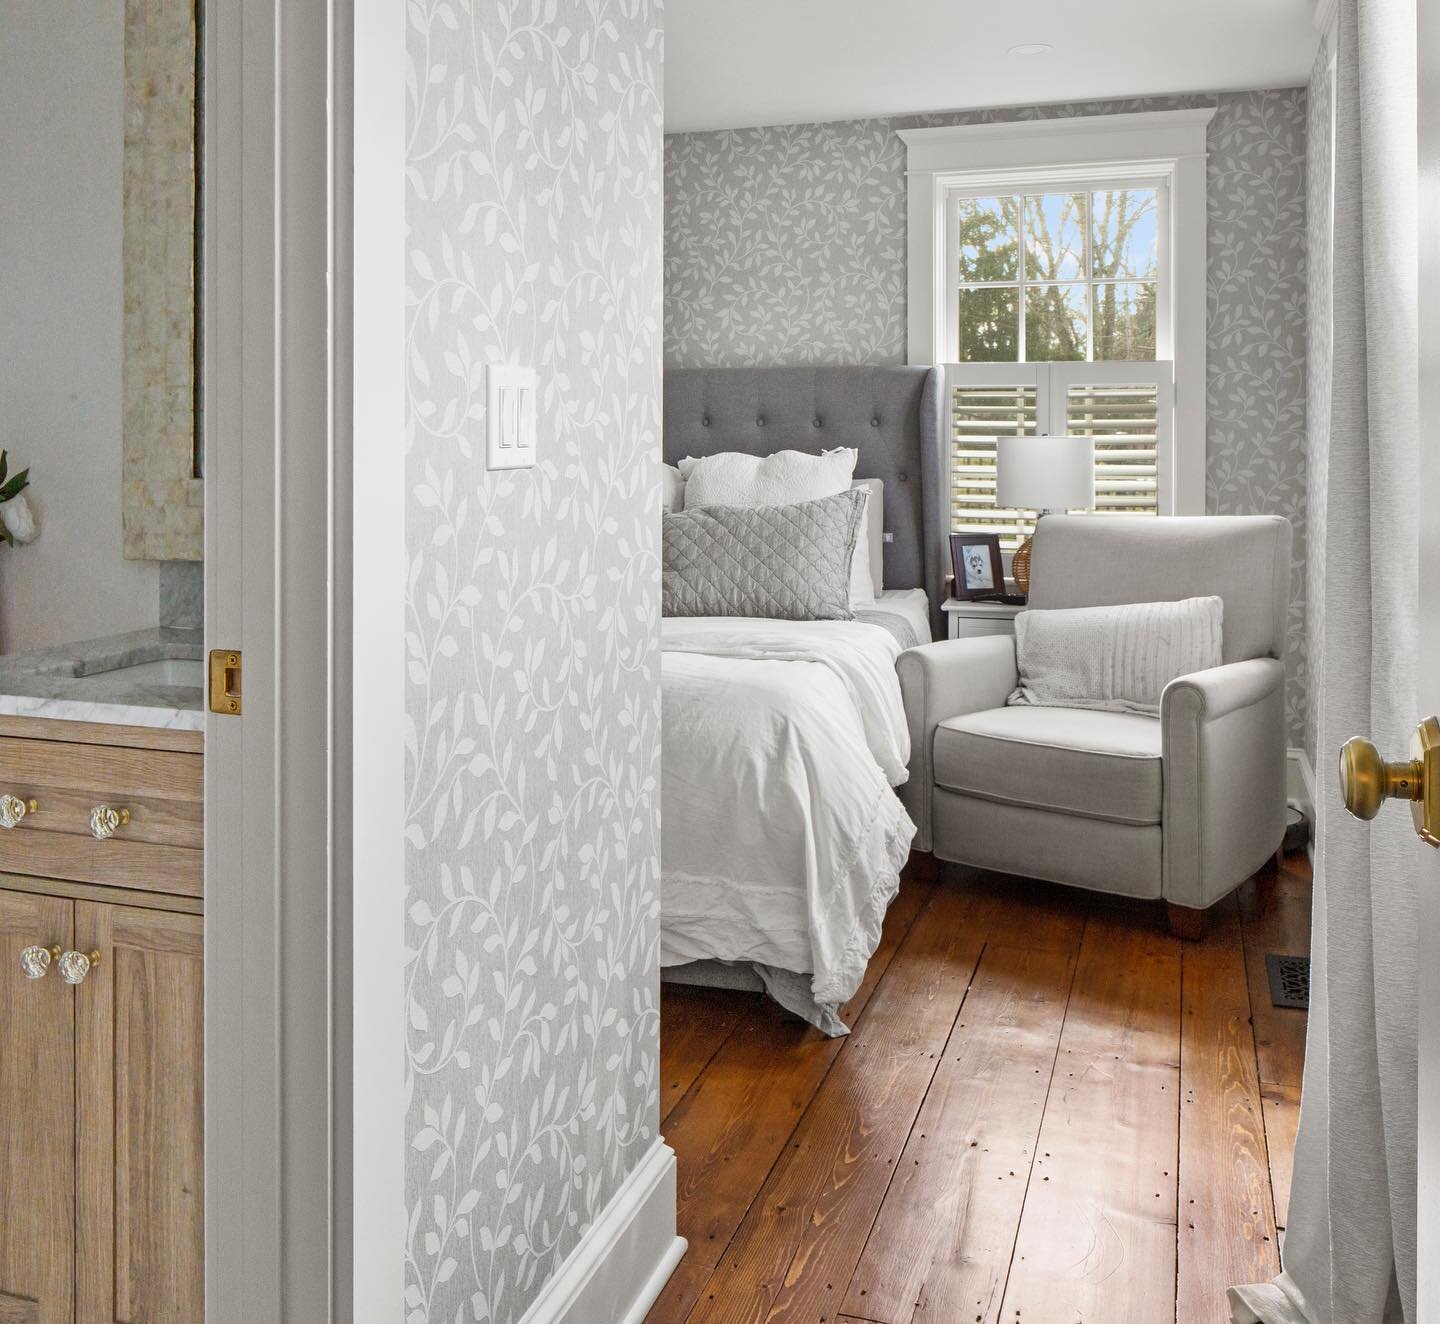 Pretty excited to have the same team that did this home to be working on me and my 300 year old charm @whiteoakhomenewengland @mjpdesign 

To see this complete home renovation, pop over to @whiteoakhomenewengland for the full link.